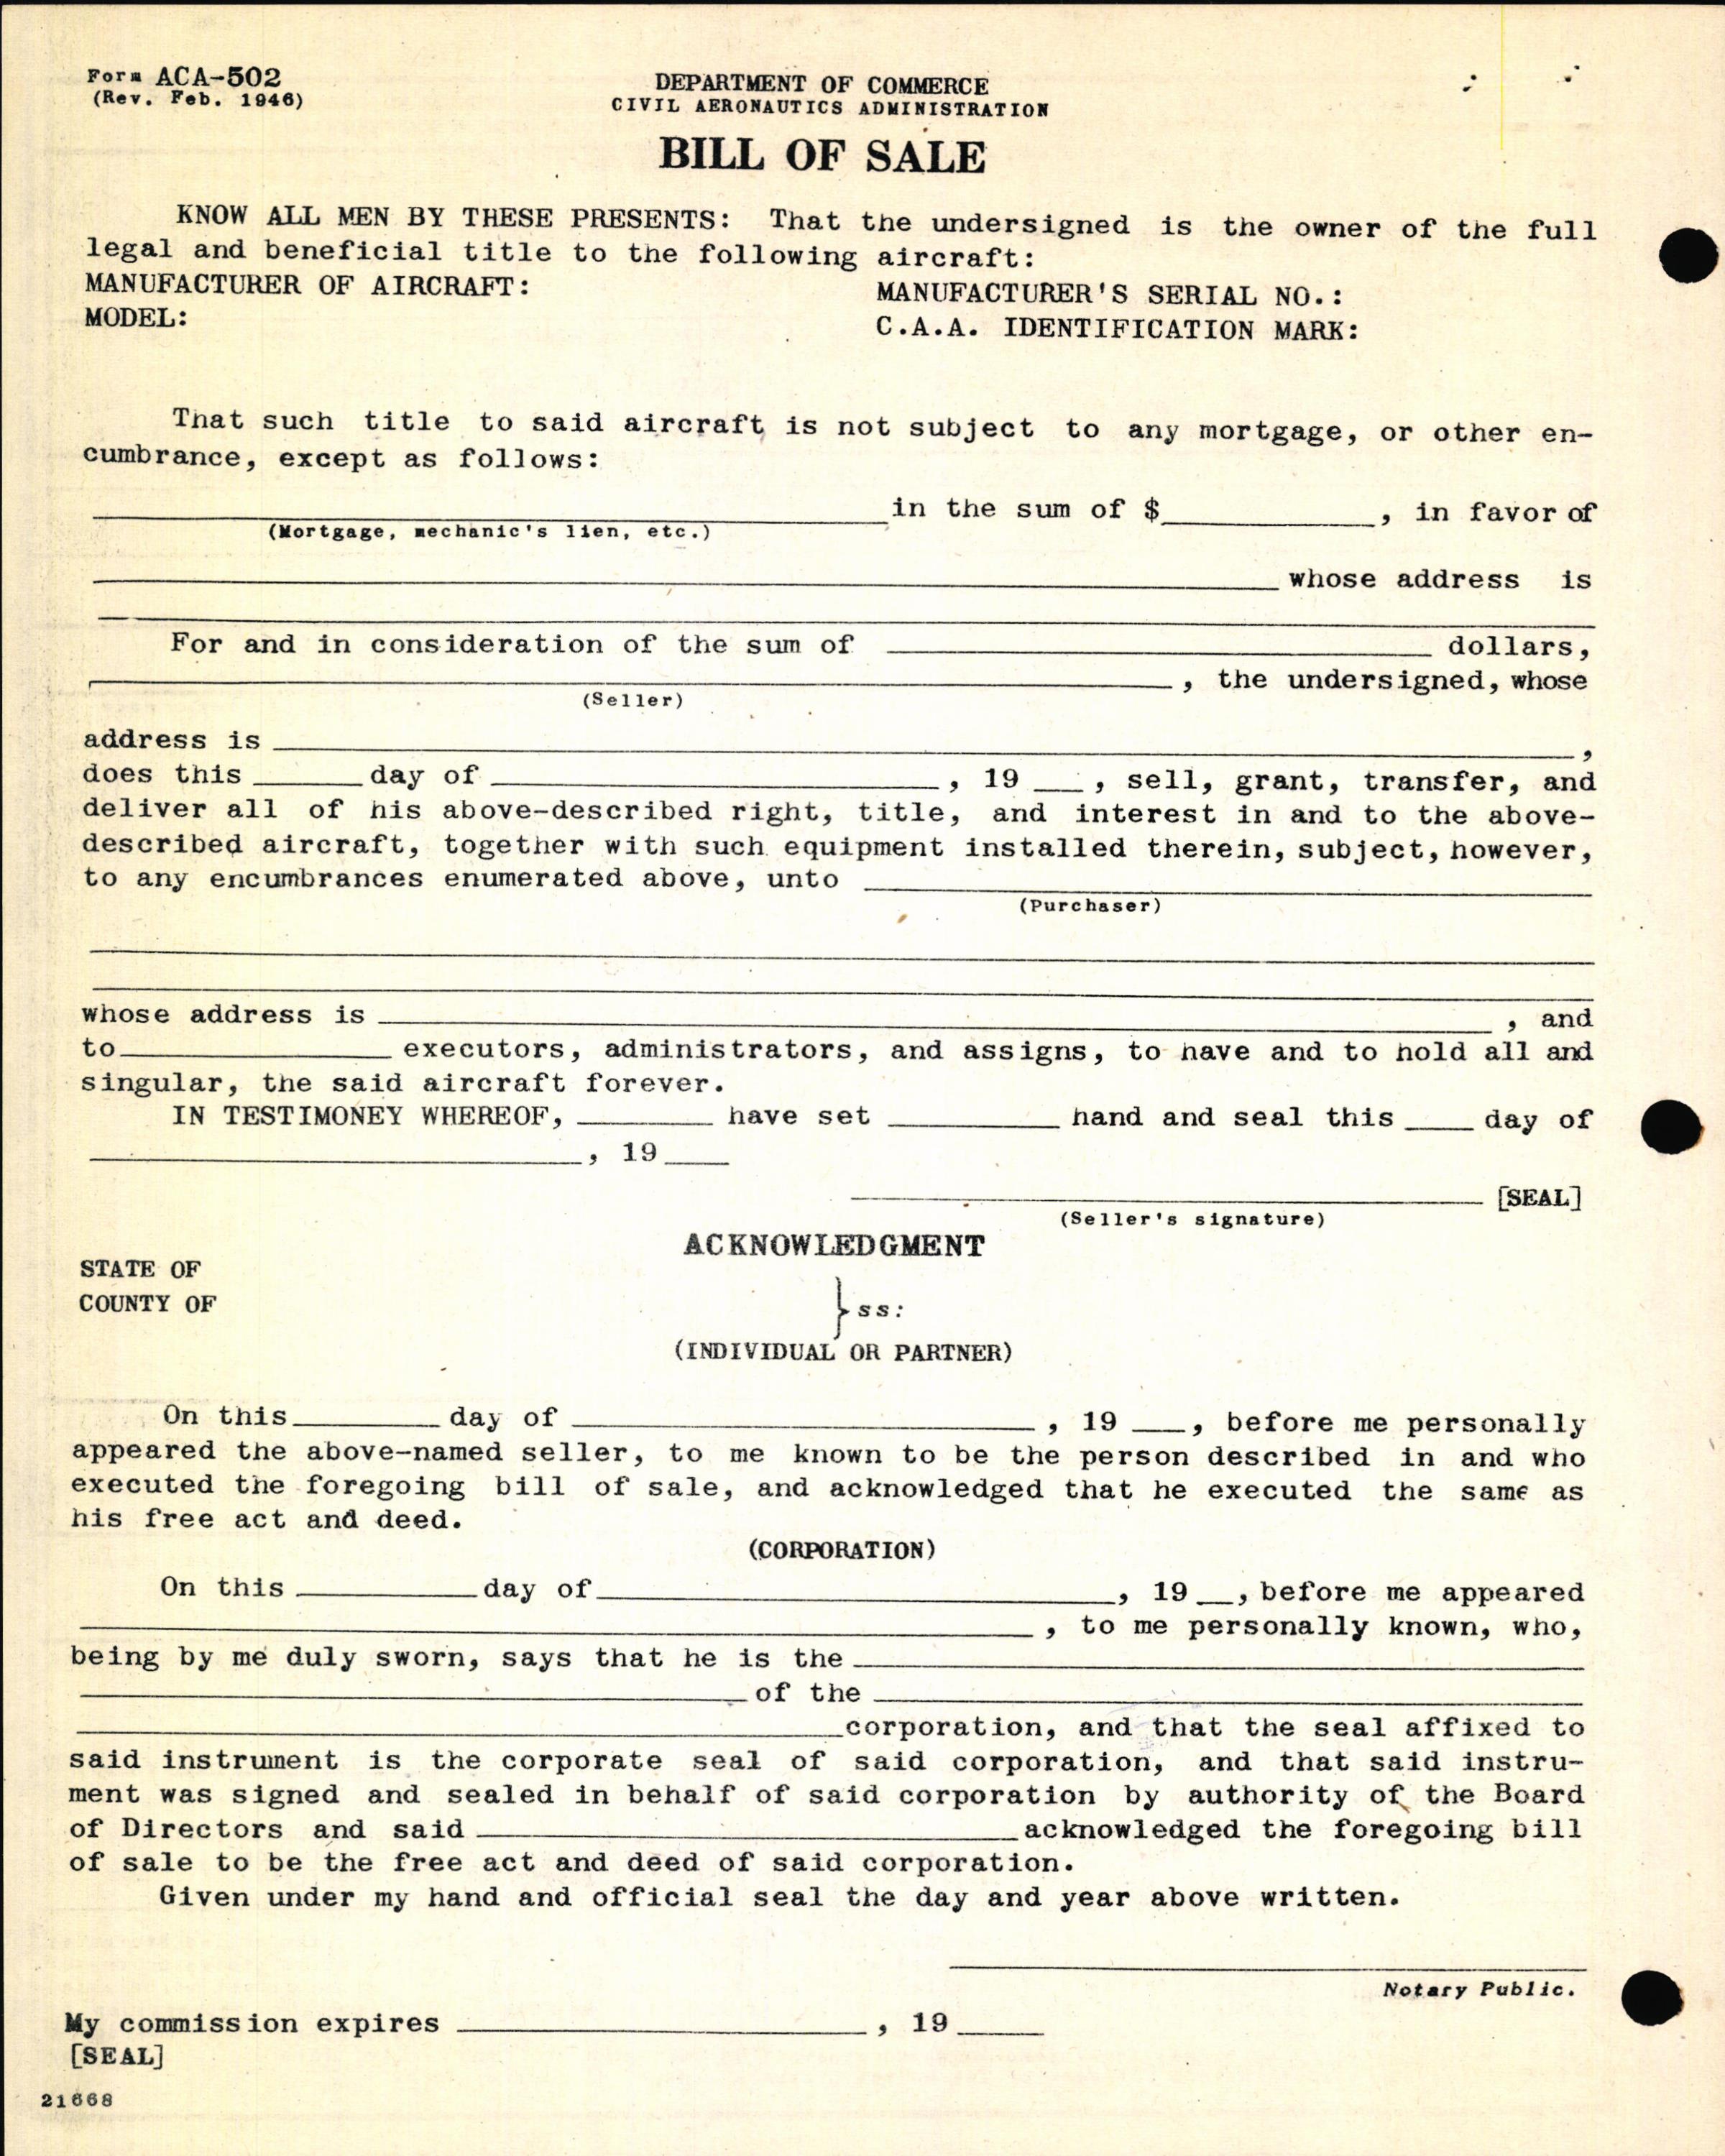 Sample page 4 from AirCorps Library document: Technical Information for Serial Number 1246